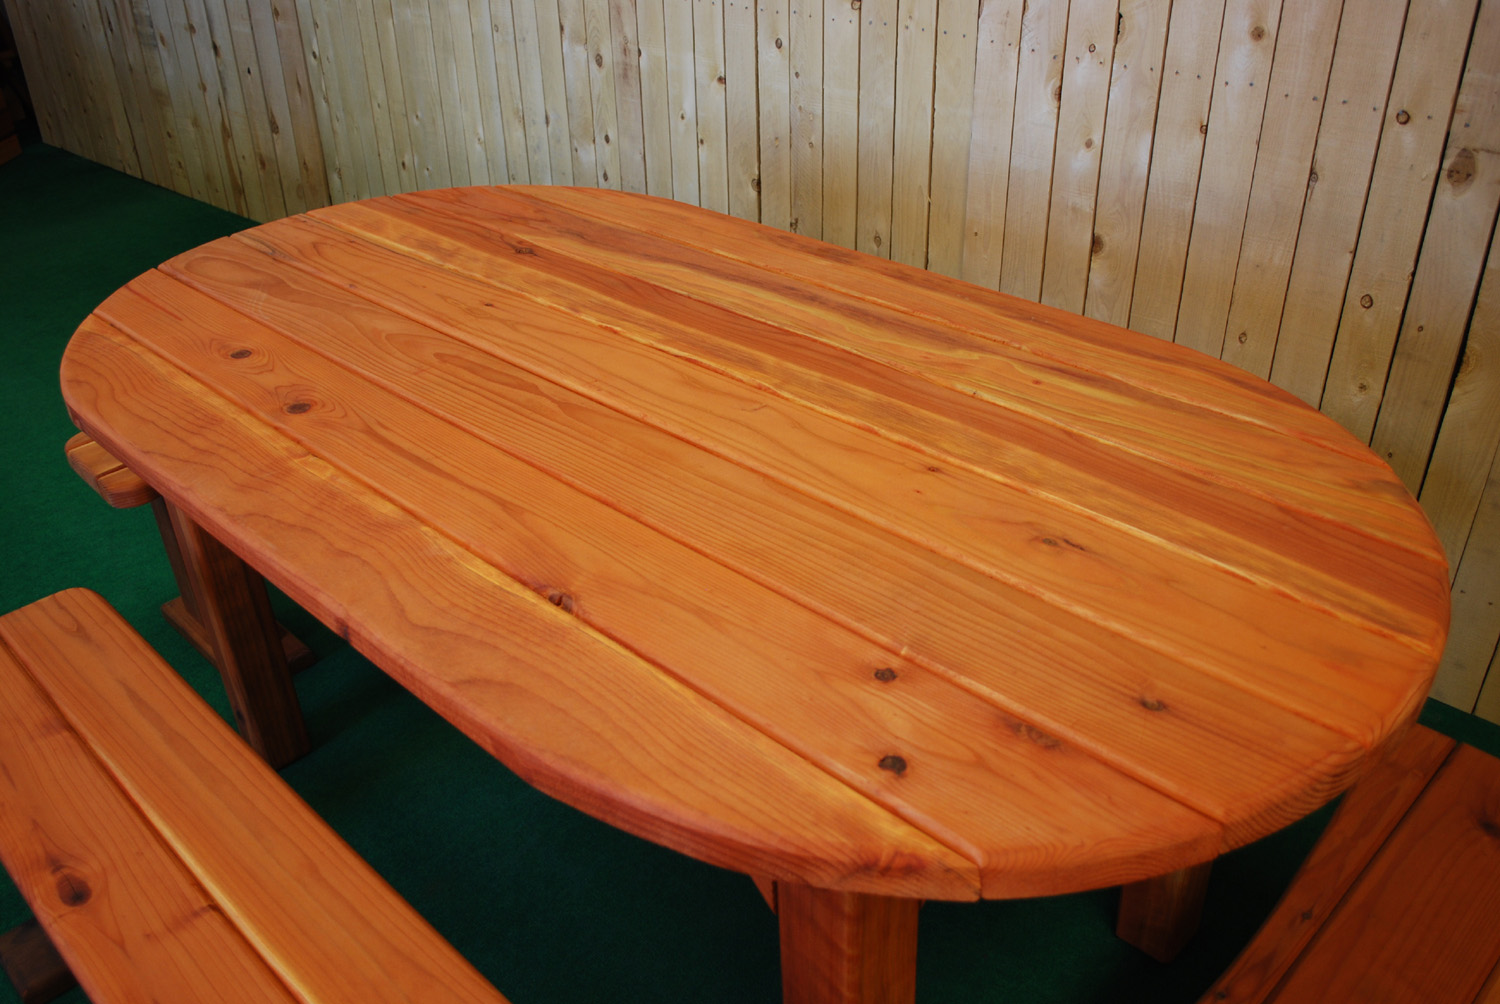 72" redwood oval picnic table